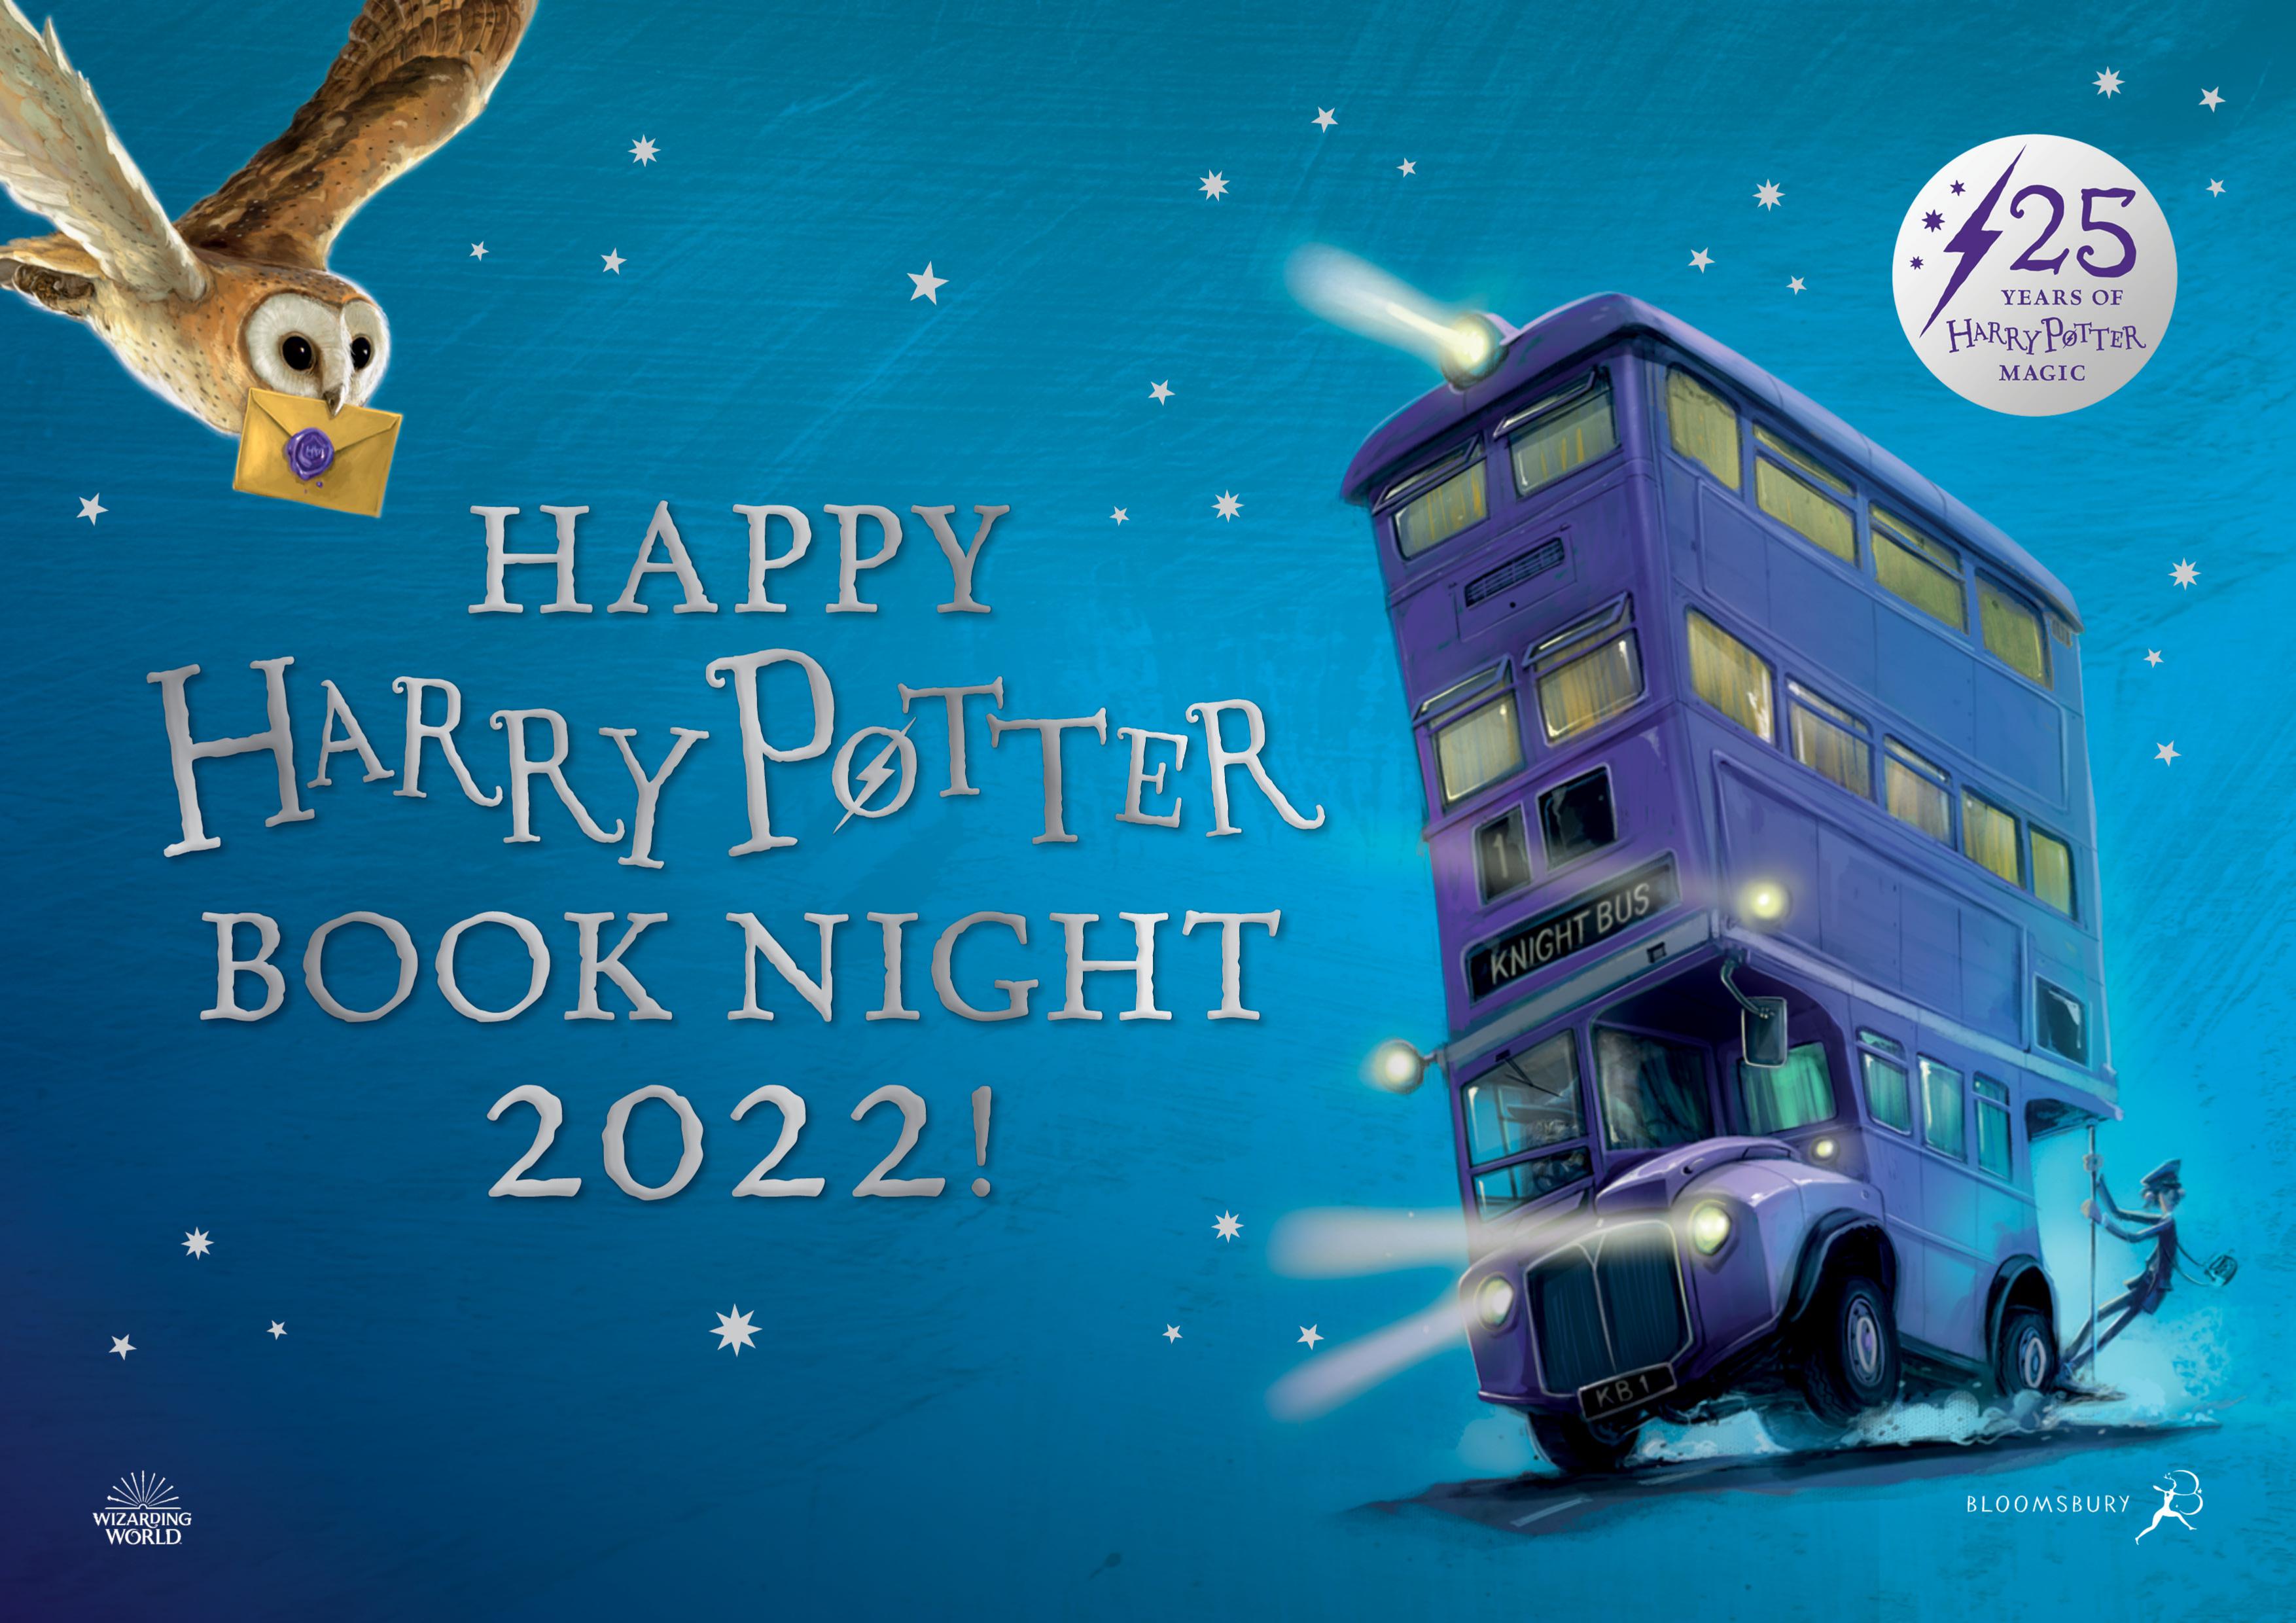 Harry Potter Book Night Poster featuring Hedwig and a Triple layer bus on a starry blue background.